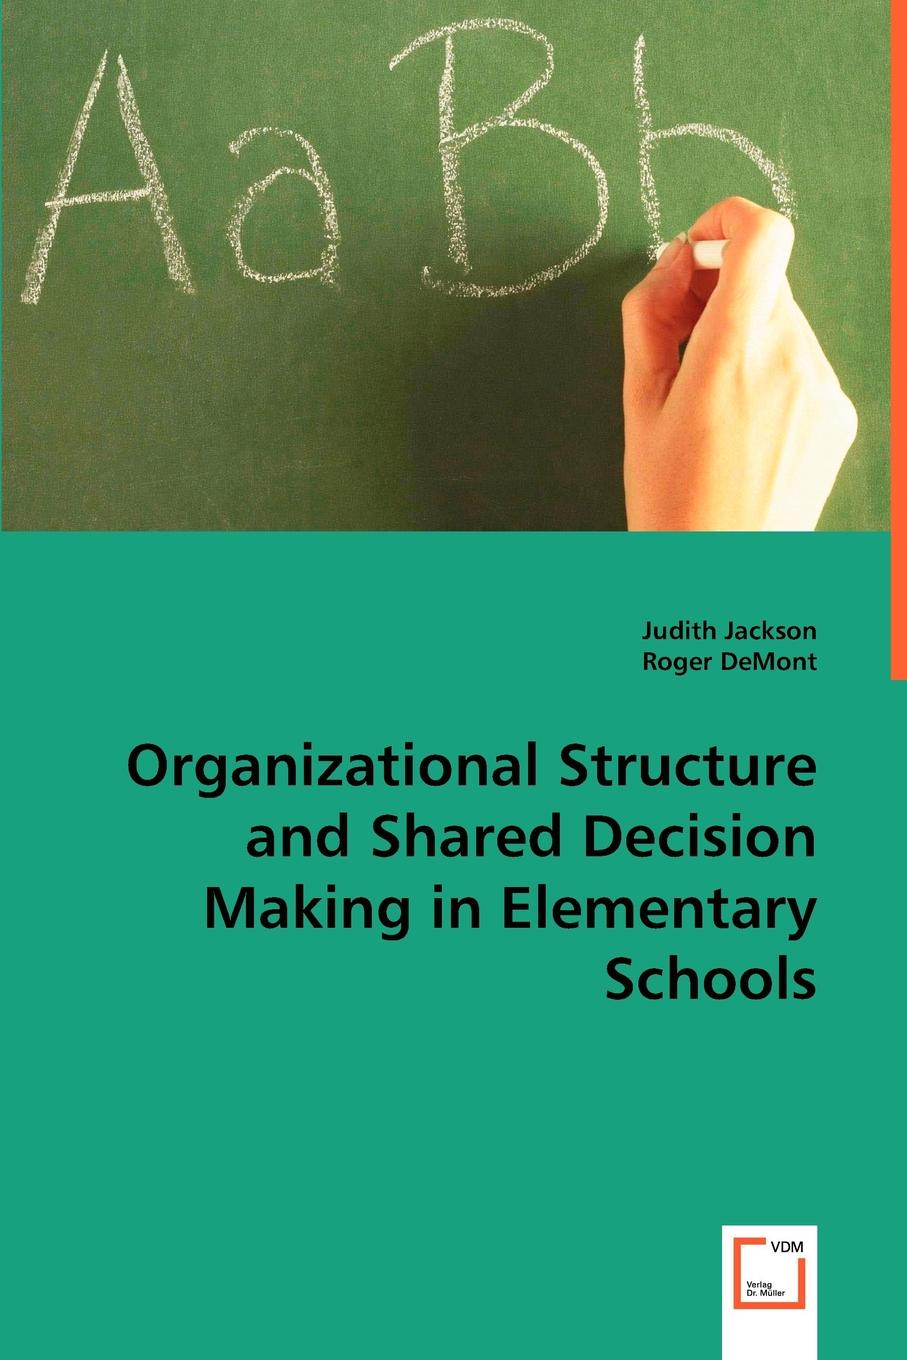 Organizational Structure and Shared Decision Making in Elementary Schools